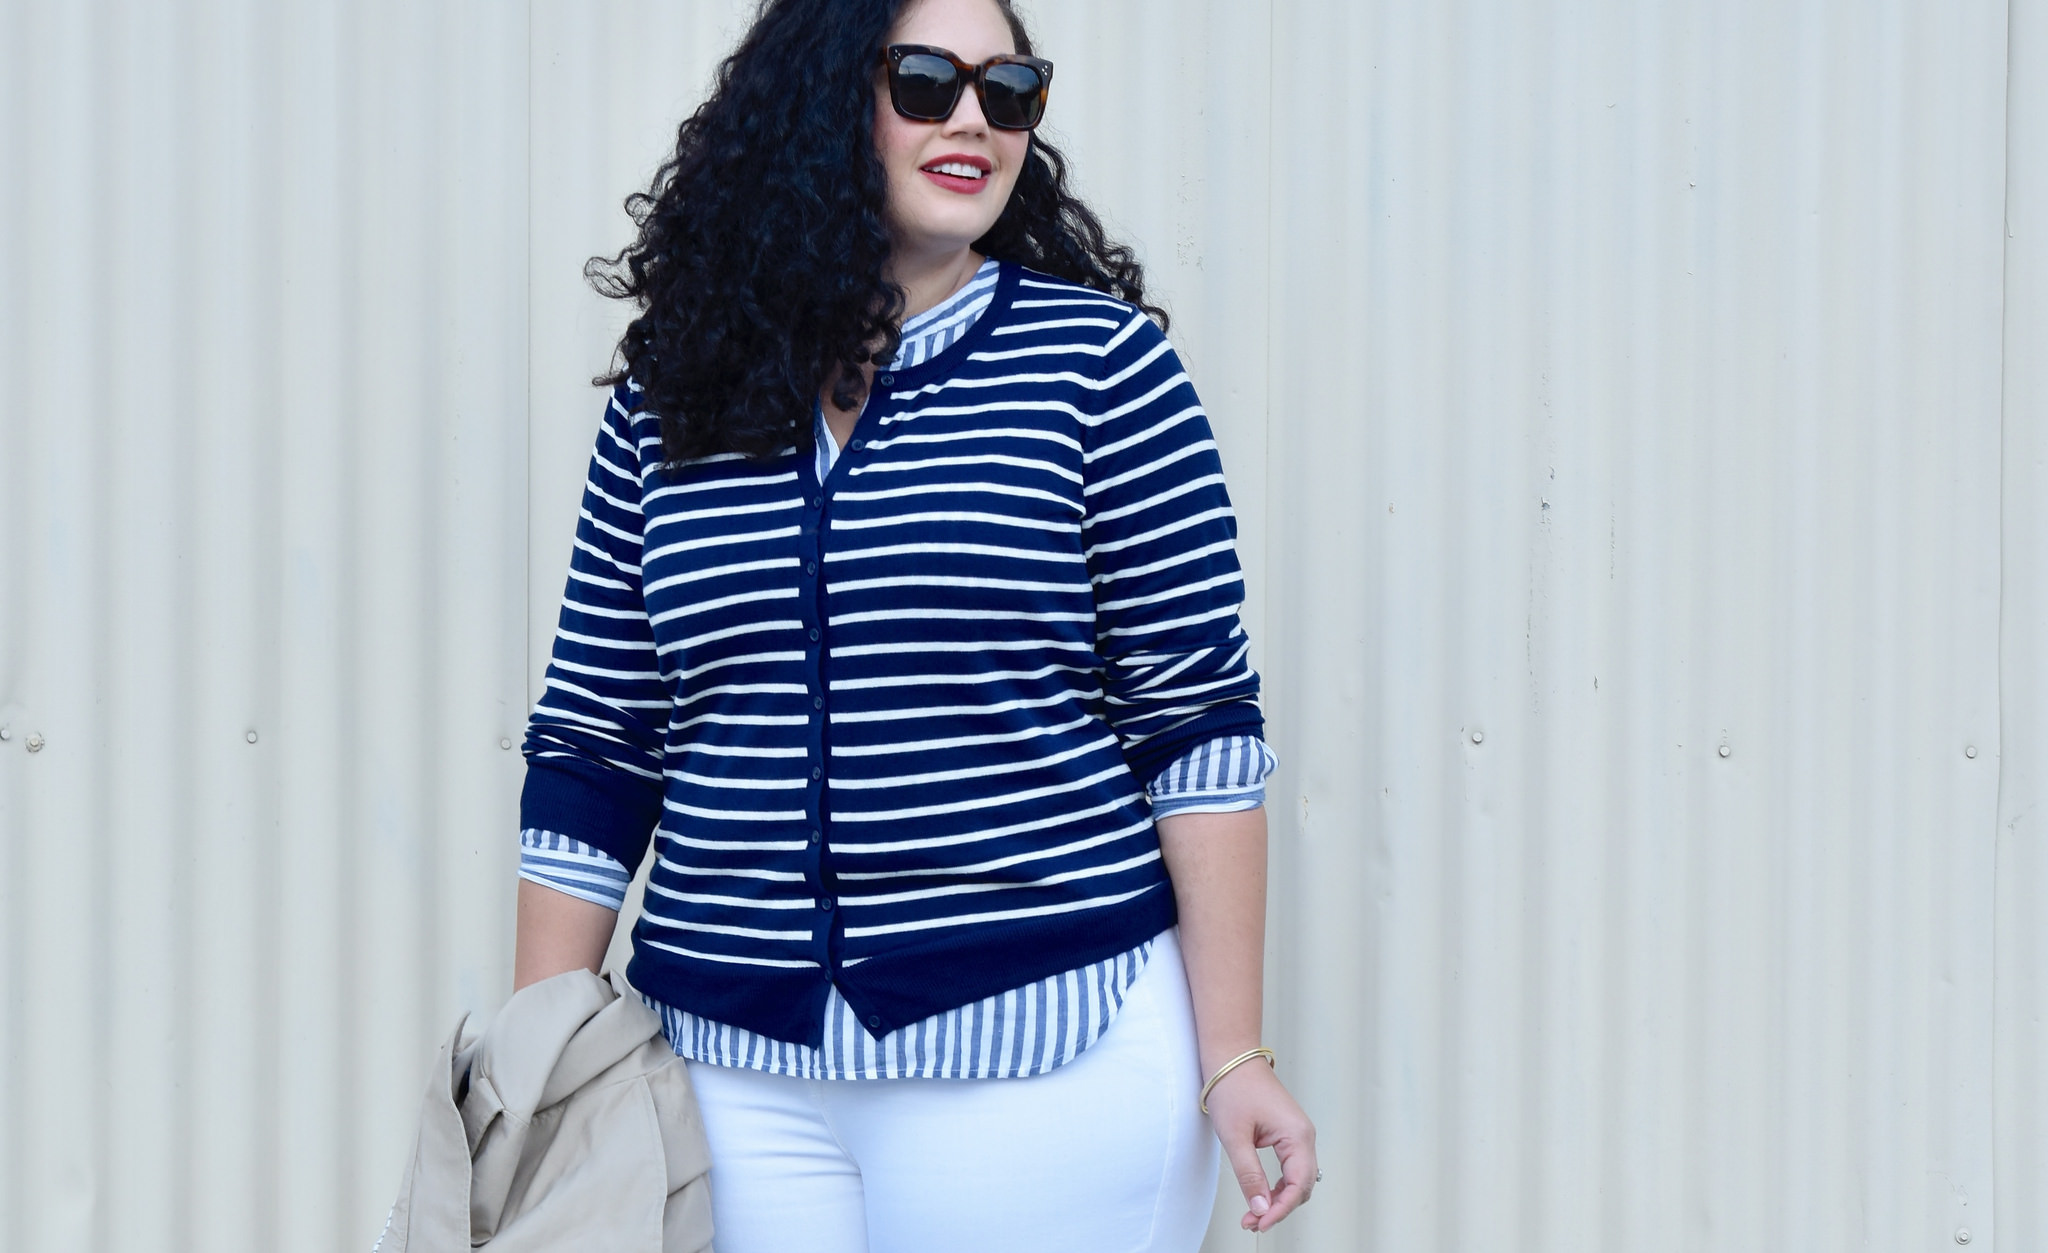 A Fresh take on the Nautical Trend for Spring